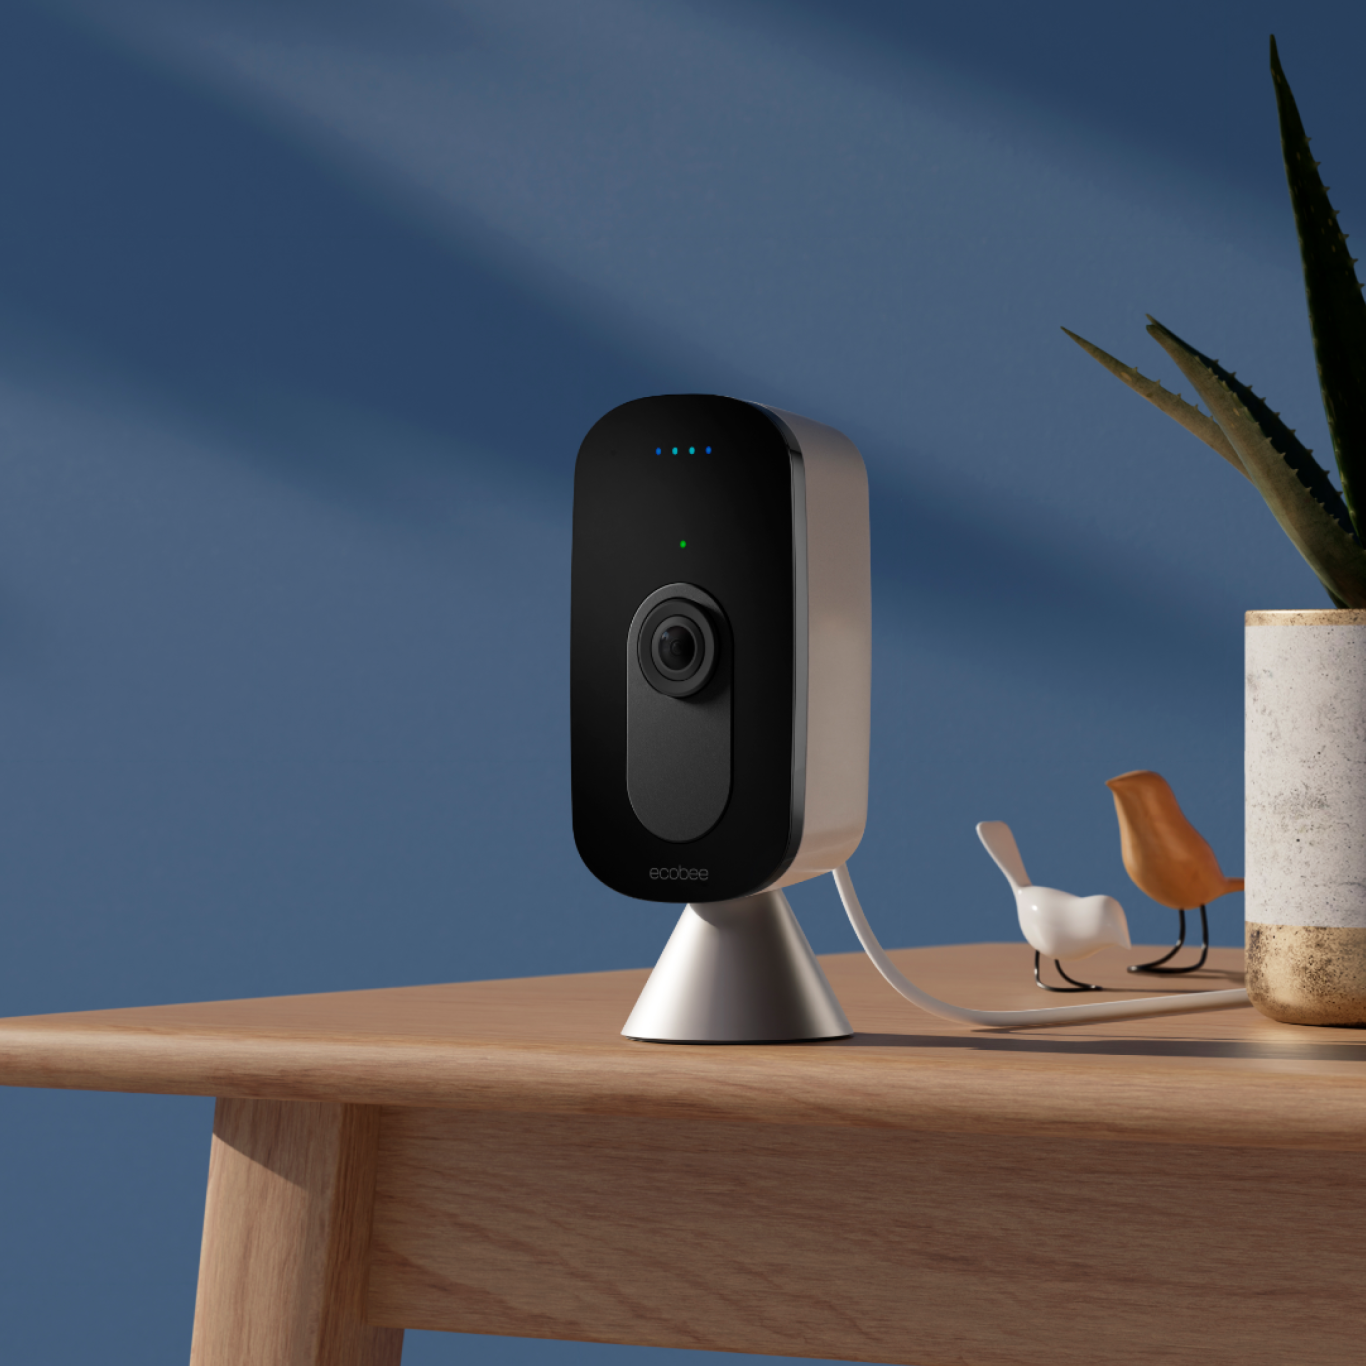 Ecobee's new voice-powered light switch moves closer to whole-home Alexa